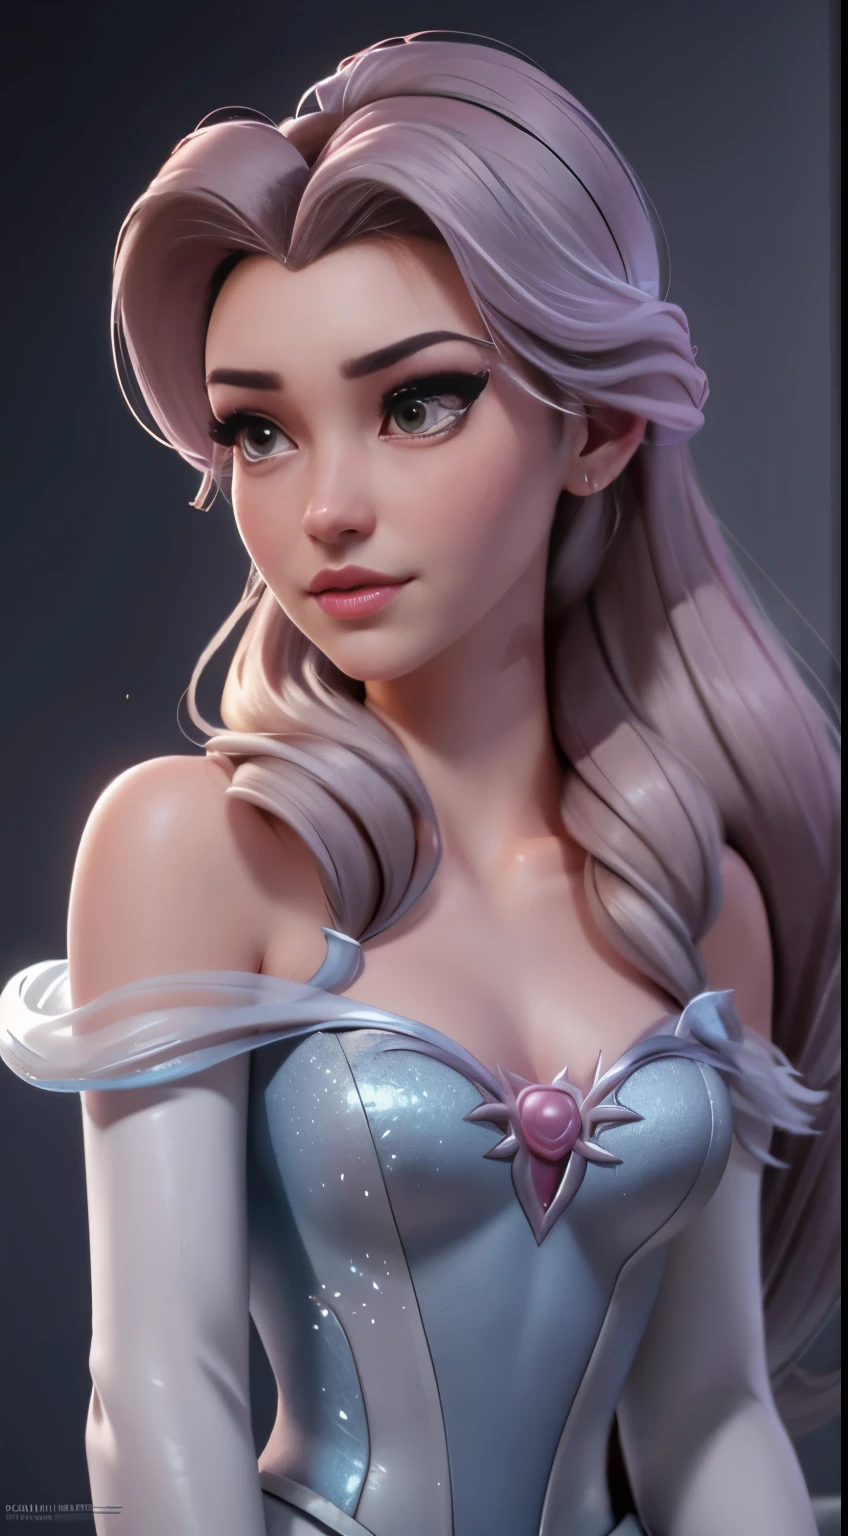 (elsa frozen-rose quartz SU mezclando modelos .) Highly detailed CG unity 8k wallpaper, style shot, complex, high detail, dramatic, highest quality movie still image, very detailed, masterpiece, best quality, character design, Elsa, Elsa from Frozen,Diamante Rosado fusión (( Dark style)), realistic ultra-detailed rendering style, natural light, sharp character design, (hard focus, 8k), (((natural skin texture))), 8k textures, soft cinematic lighting, adobe lightroom, dark room, hdr, Sophisticated, Elegant, Rich Detail, Sharp Focuilm Look) )), Soothing Tones, Detail Frenzy, Intricate Detail, Super Detail, Low Contrast, Soft Film Lighting, Dull Colors, Exposure Blending, HDR, Fade, 35mm, f/1.4, ISO, f16, 25 sec.